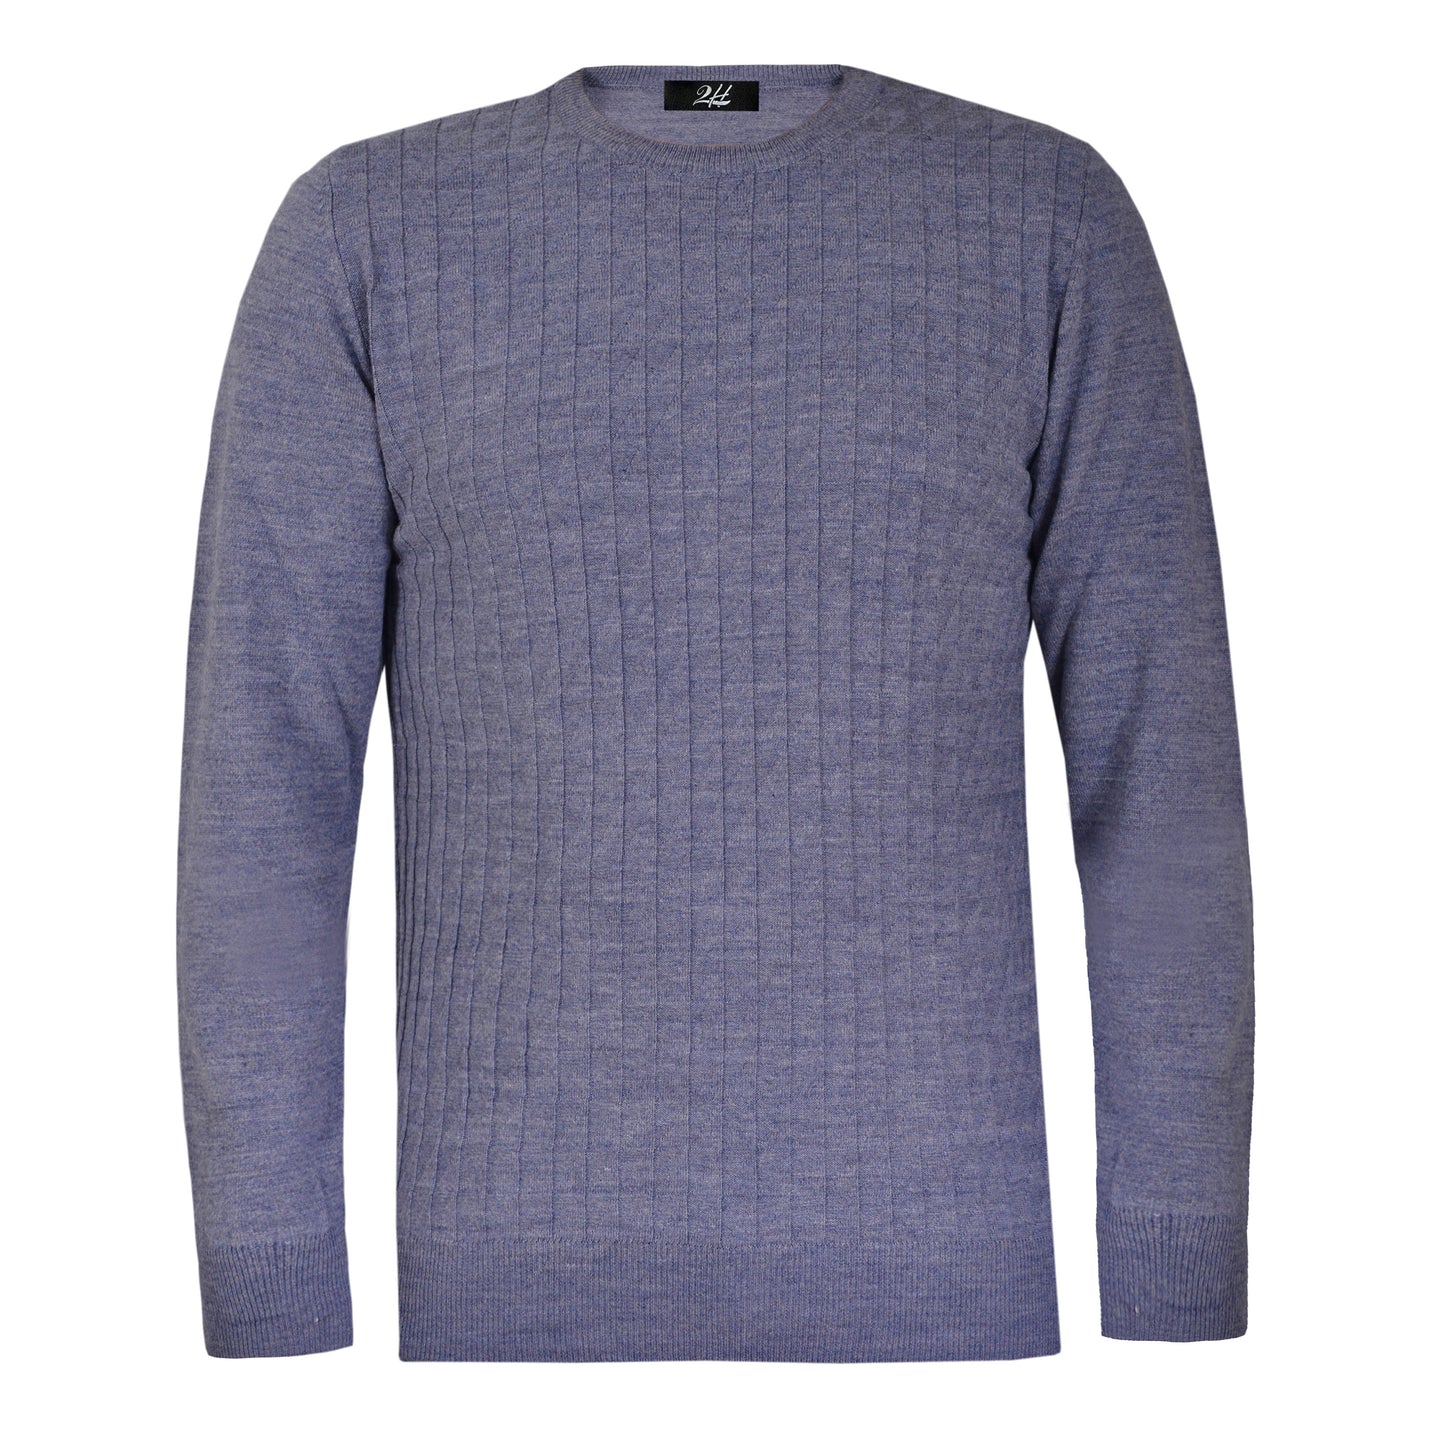 2H Blue Small Squareds  Knitted Round Neck Sweater